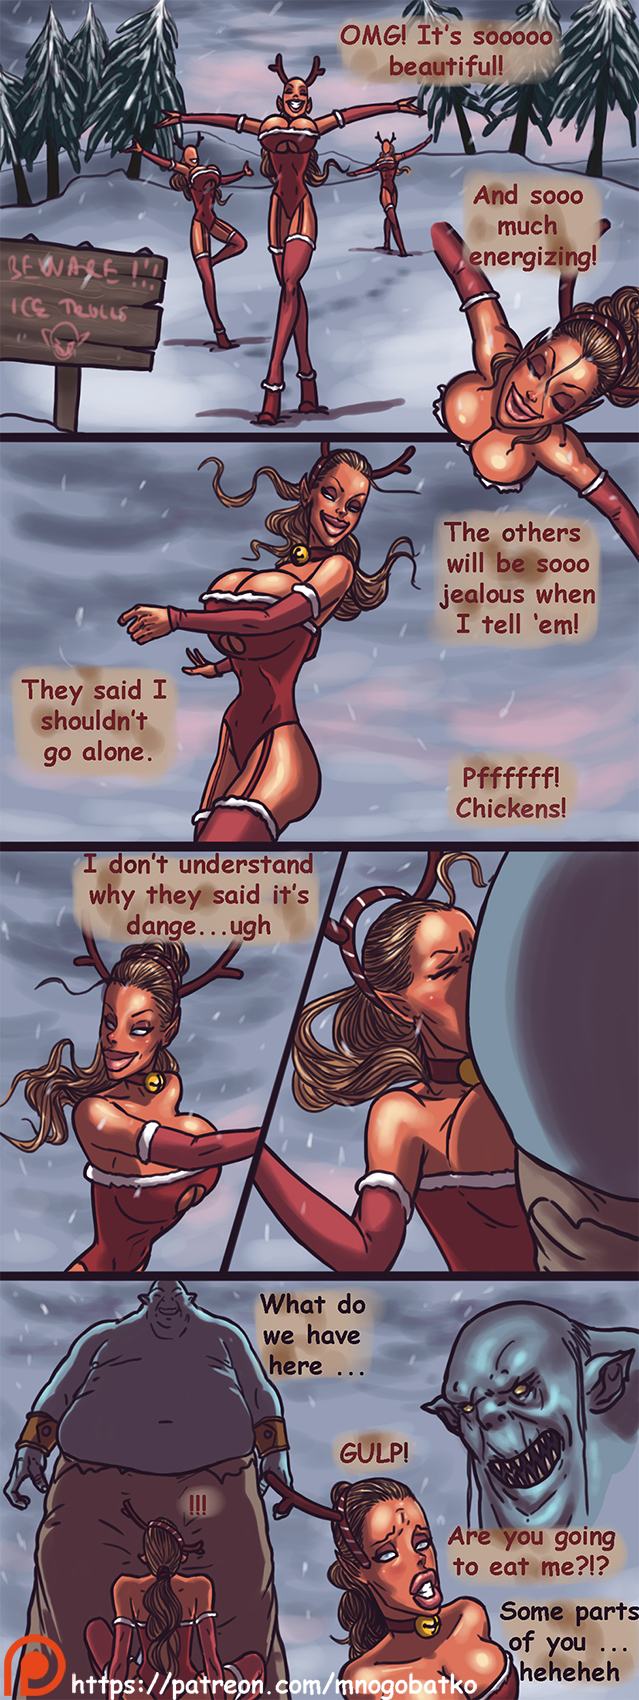 Updated threesome comic by Mnogobatko Winter Tale Ongoing Porn Comic